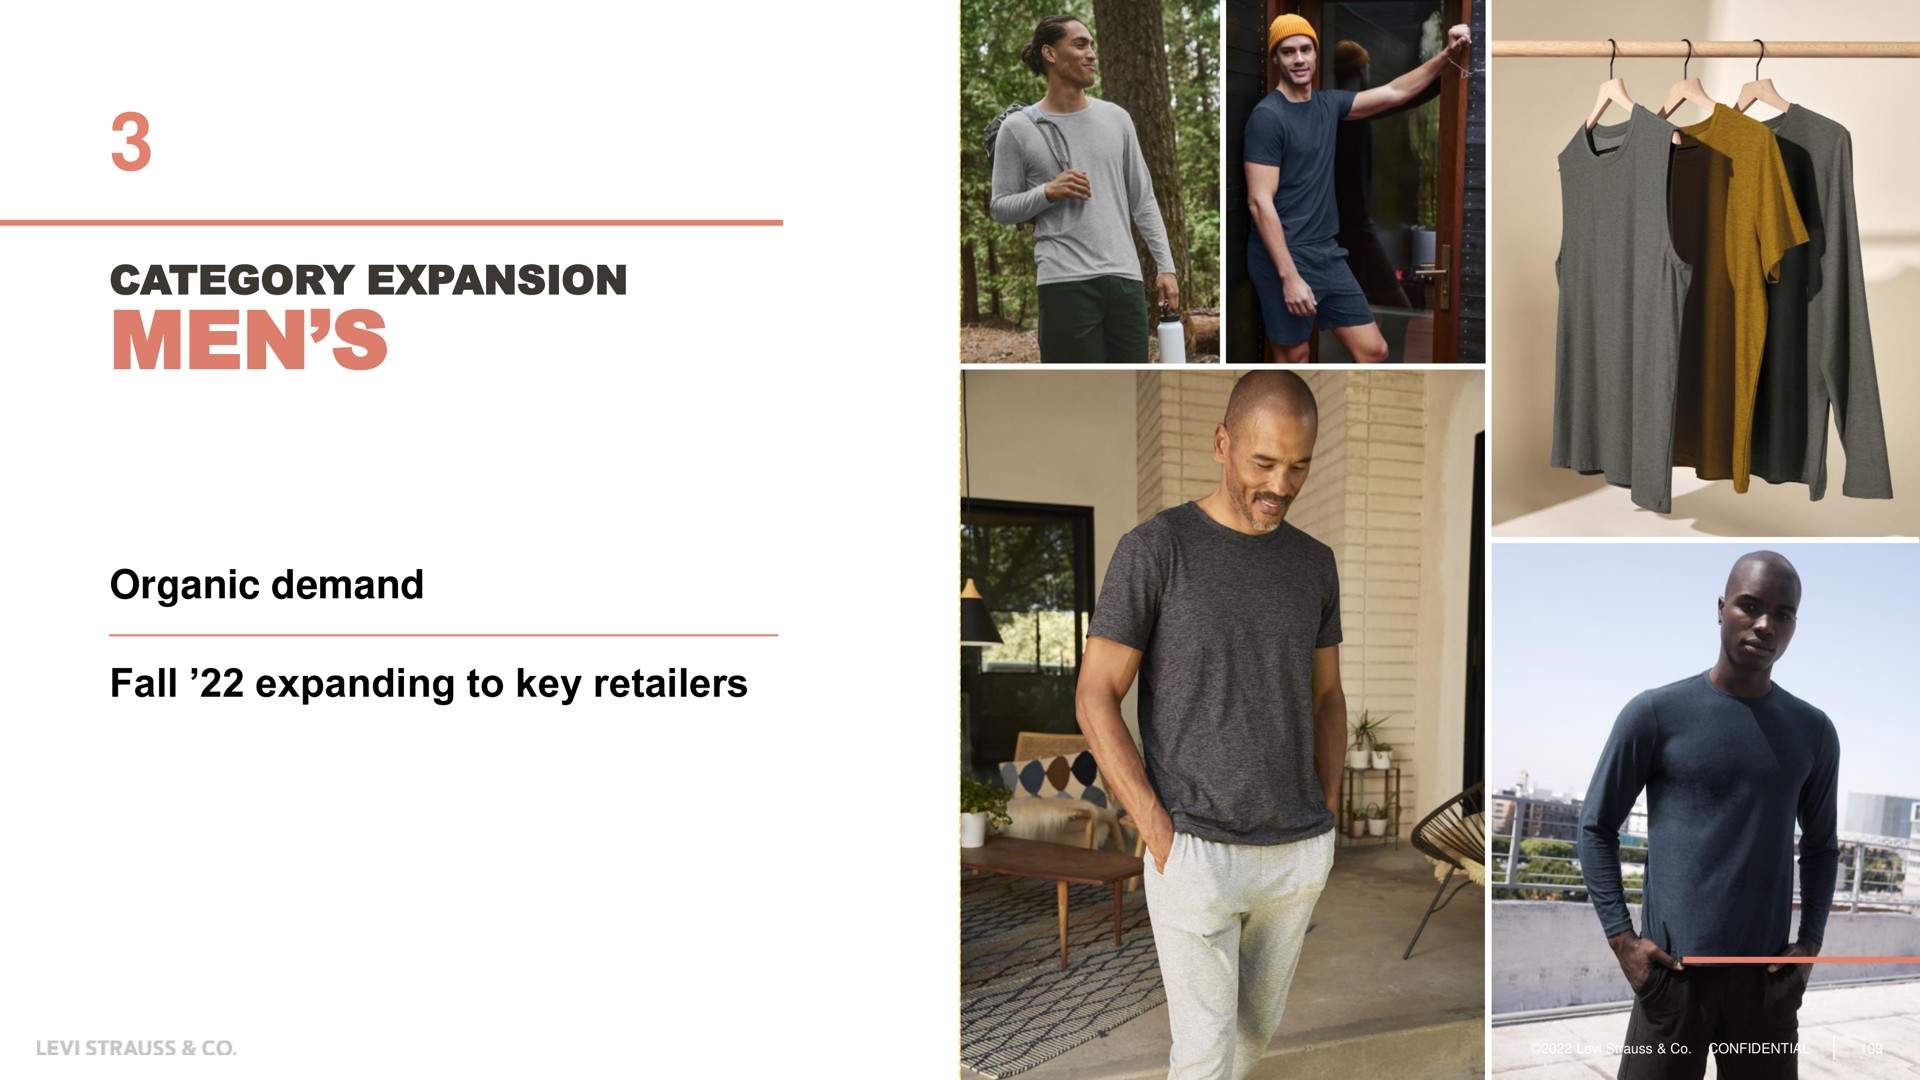 category expansion men organic demand fall expanding to key retailers | Levi Strauss